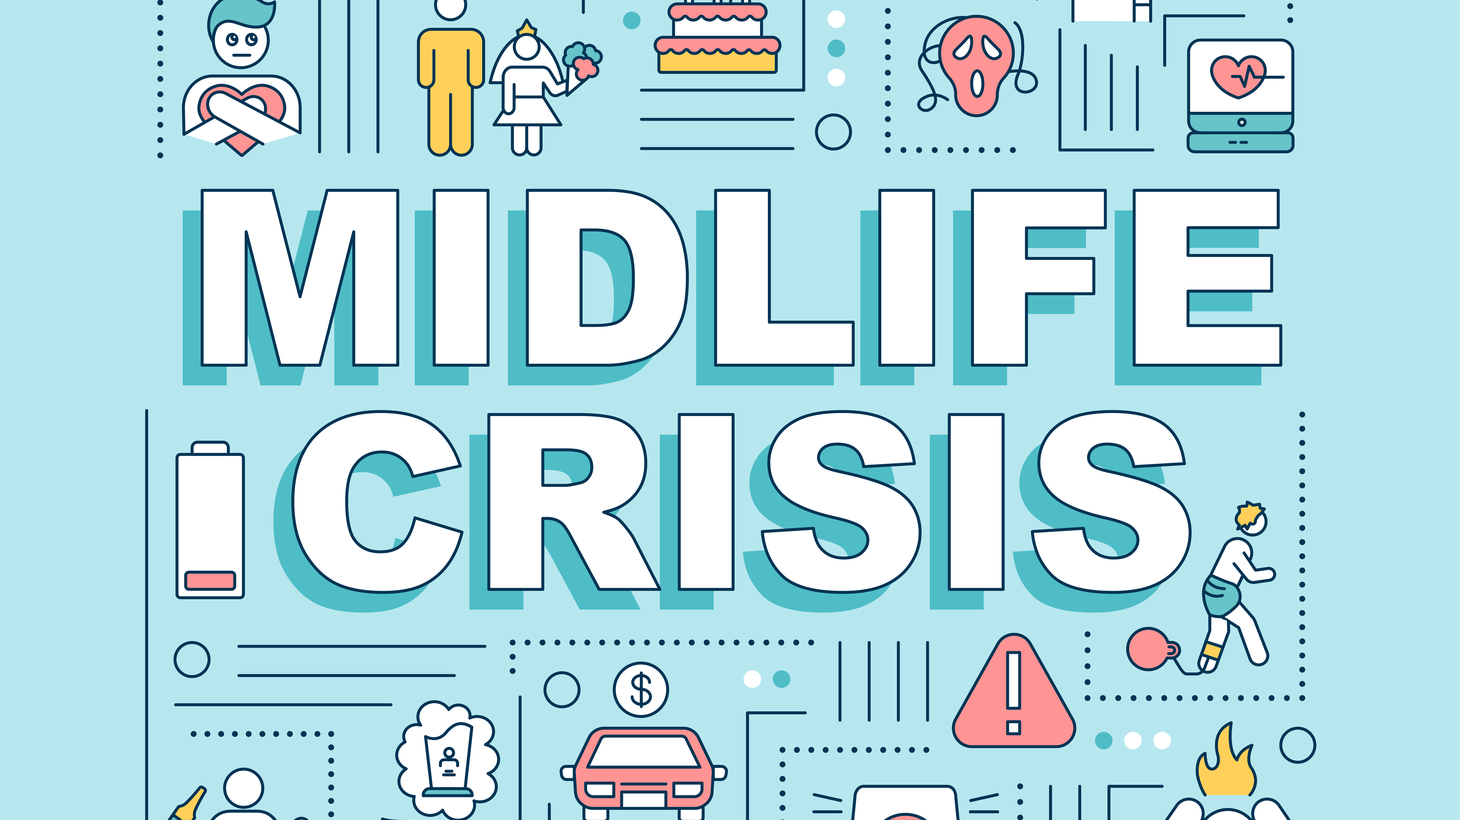 “While the idea of midlife as a time of acute crisis might be an exaggeration, there is some evidence that it's a period of relative malaise, a period of relative difficulty,” says philosopher Kieran Setiya.